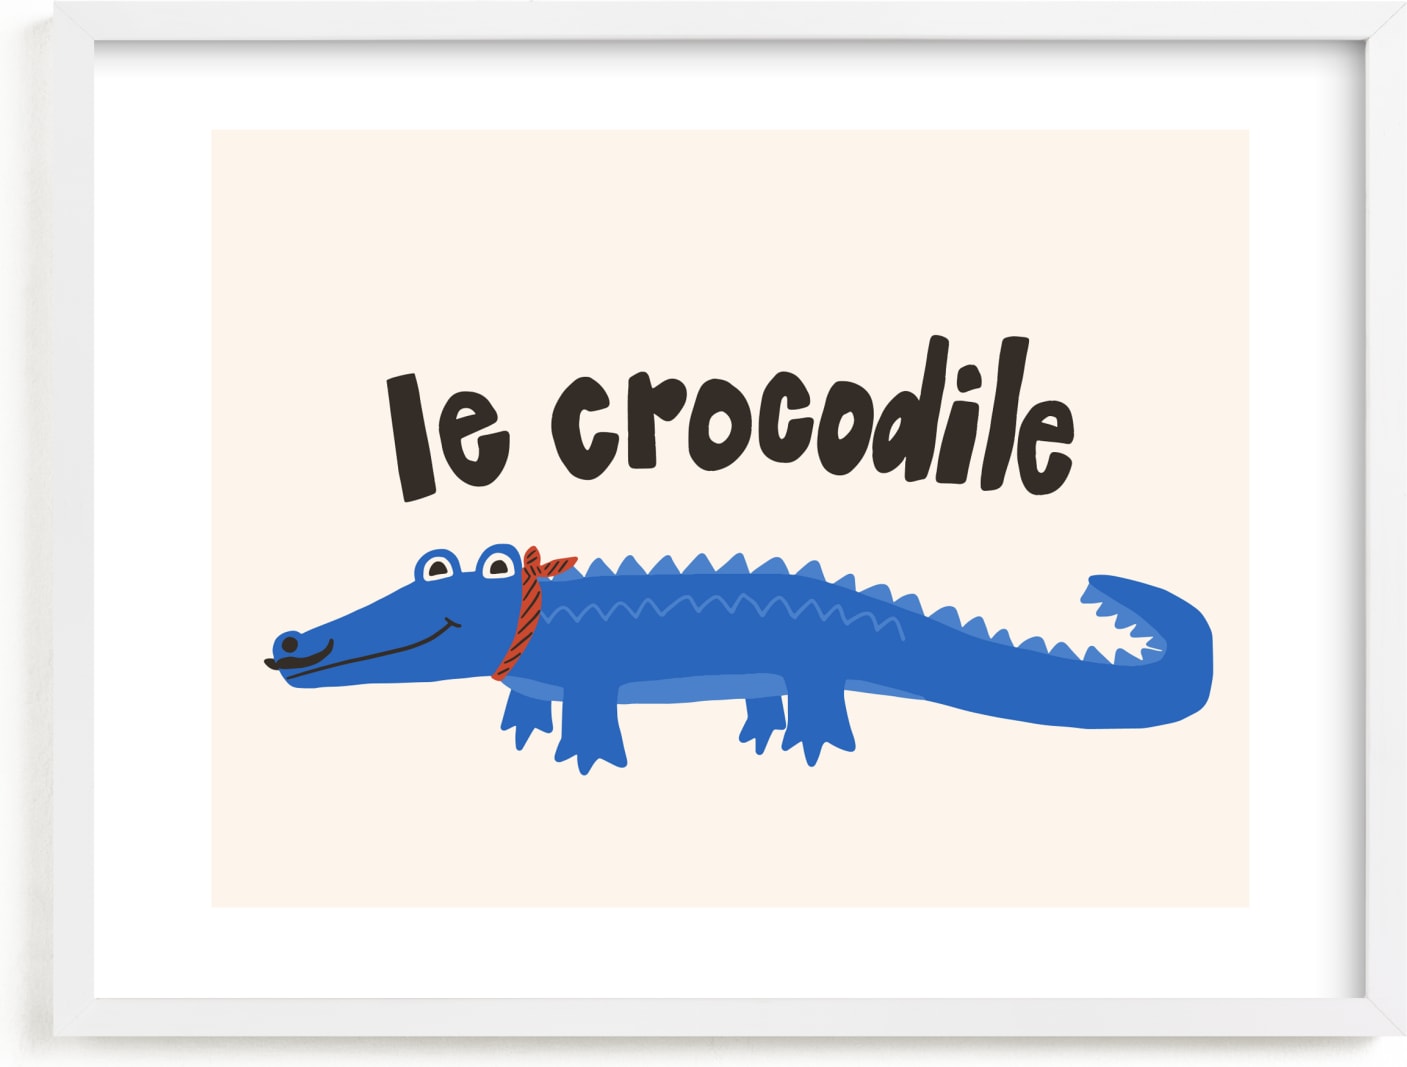 This is a blue art by Morgan Kendall called French Crocodile.